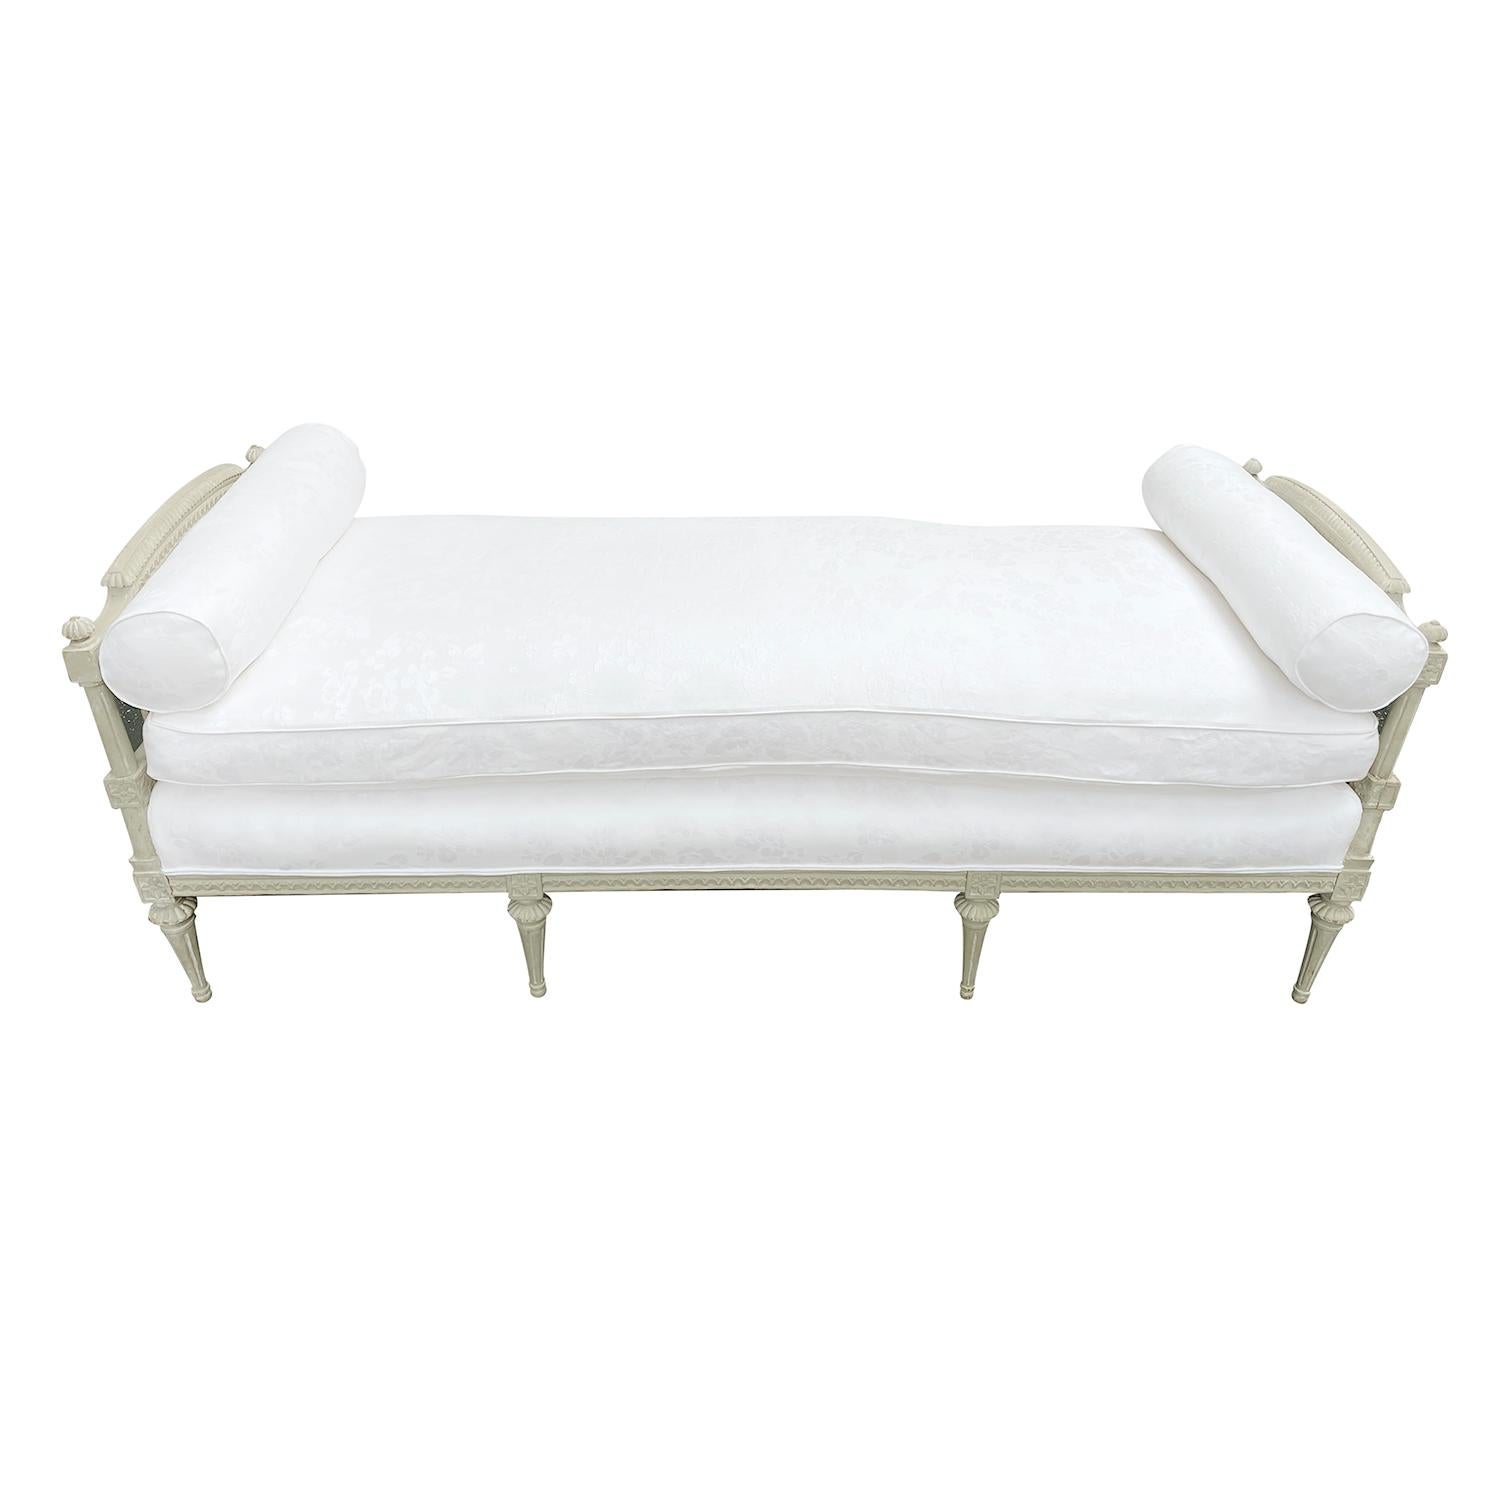 Hand-Painted 18th-19th Century White Swedish Gustavian Pinewood Daybed, Antique Sofa Bench For Sale